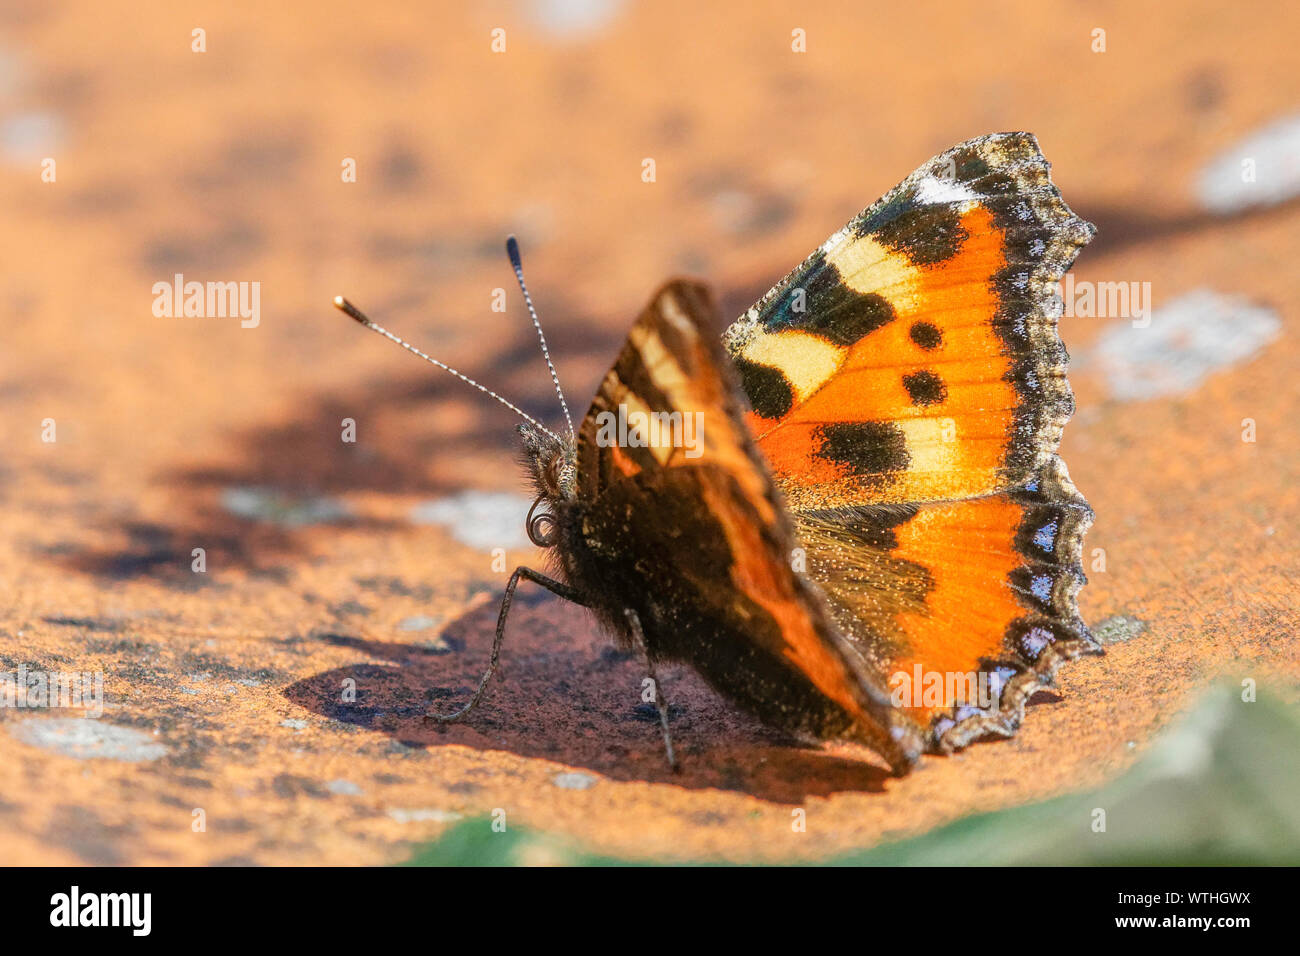 small tortoiseshell butterfly perched on roof tile Stock Photo